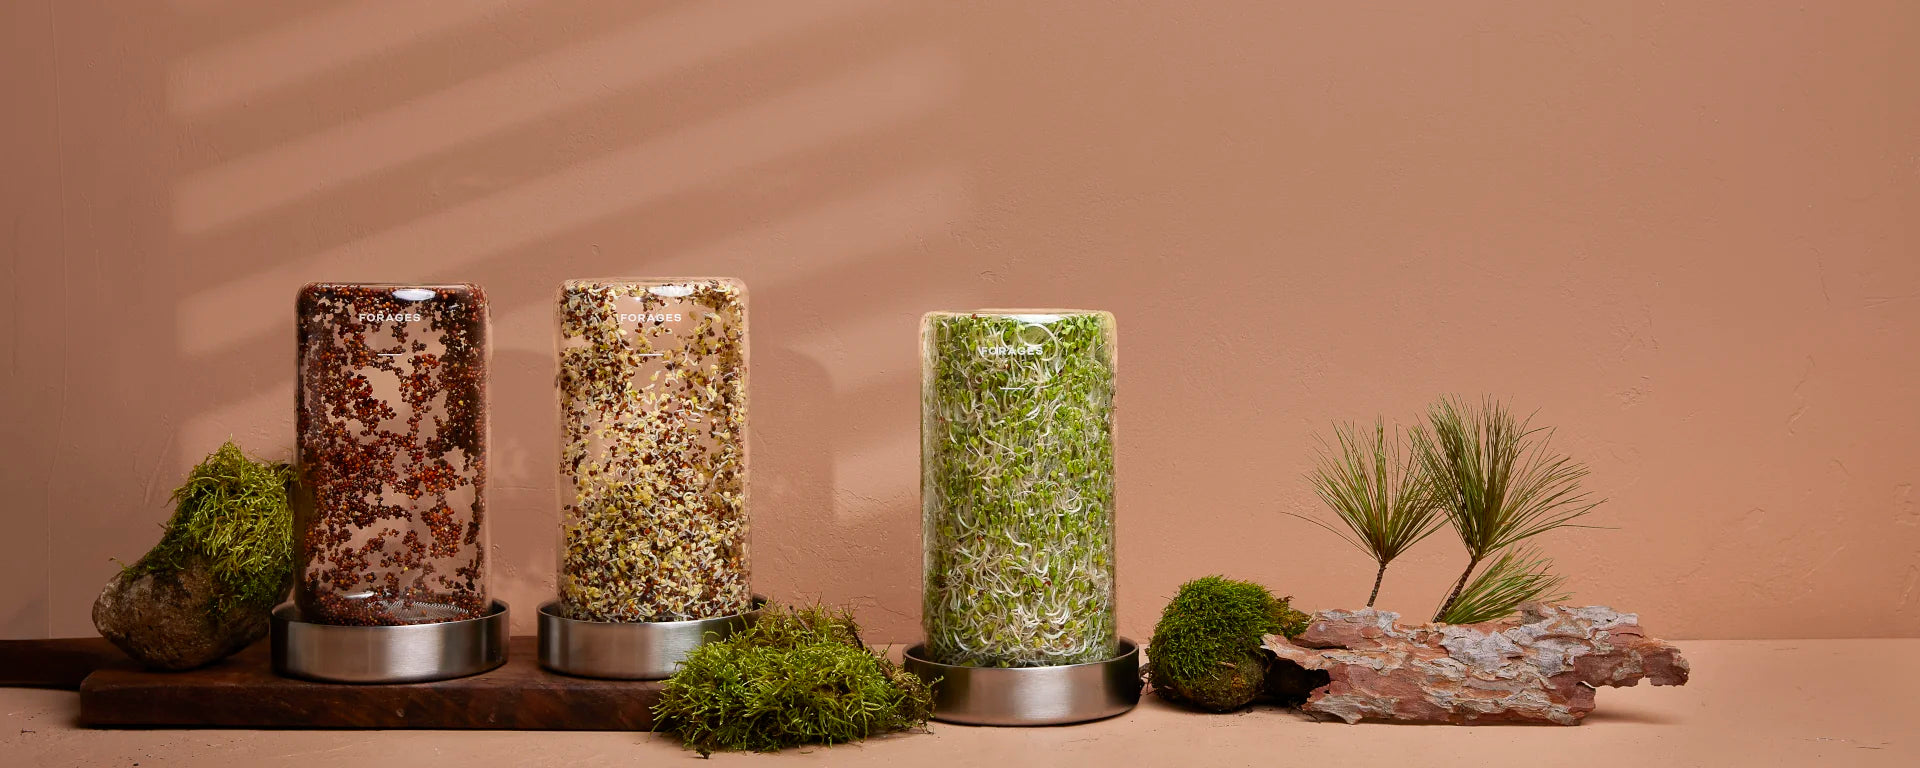 Three Forages Sprout Jar Kits showing stages of Broccoli Sprouts with moss